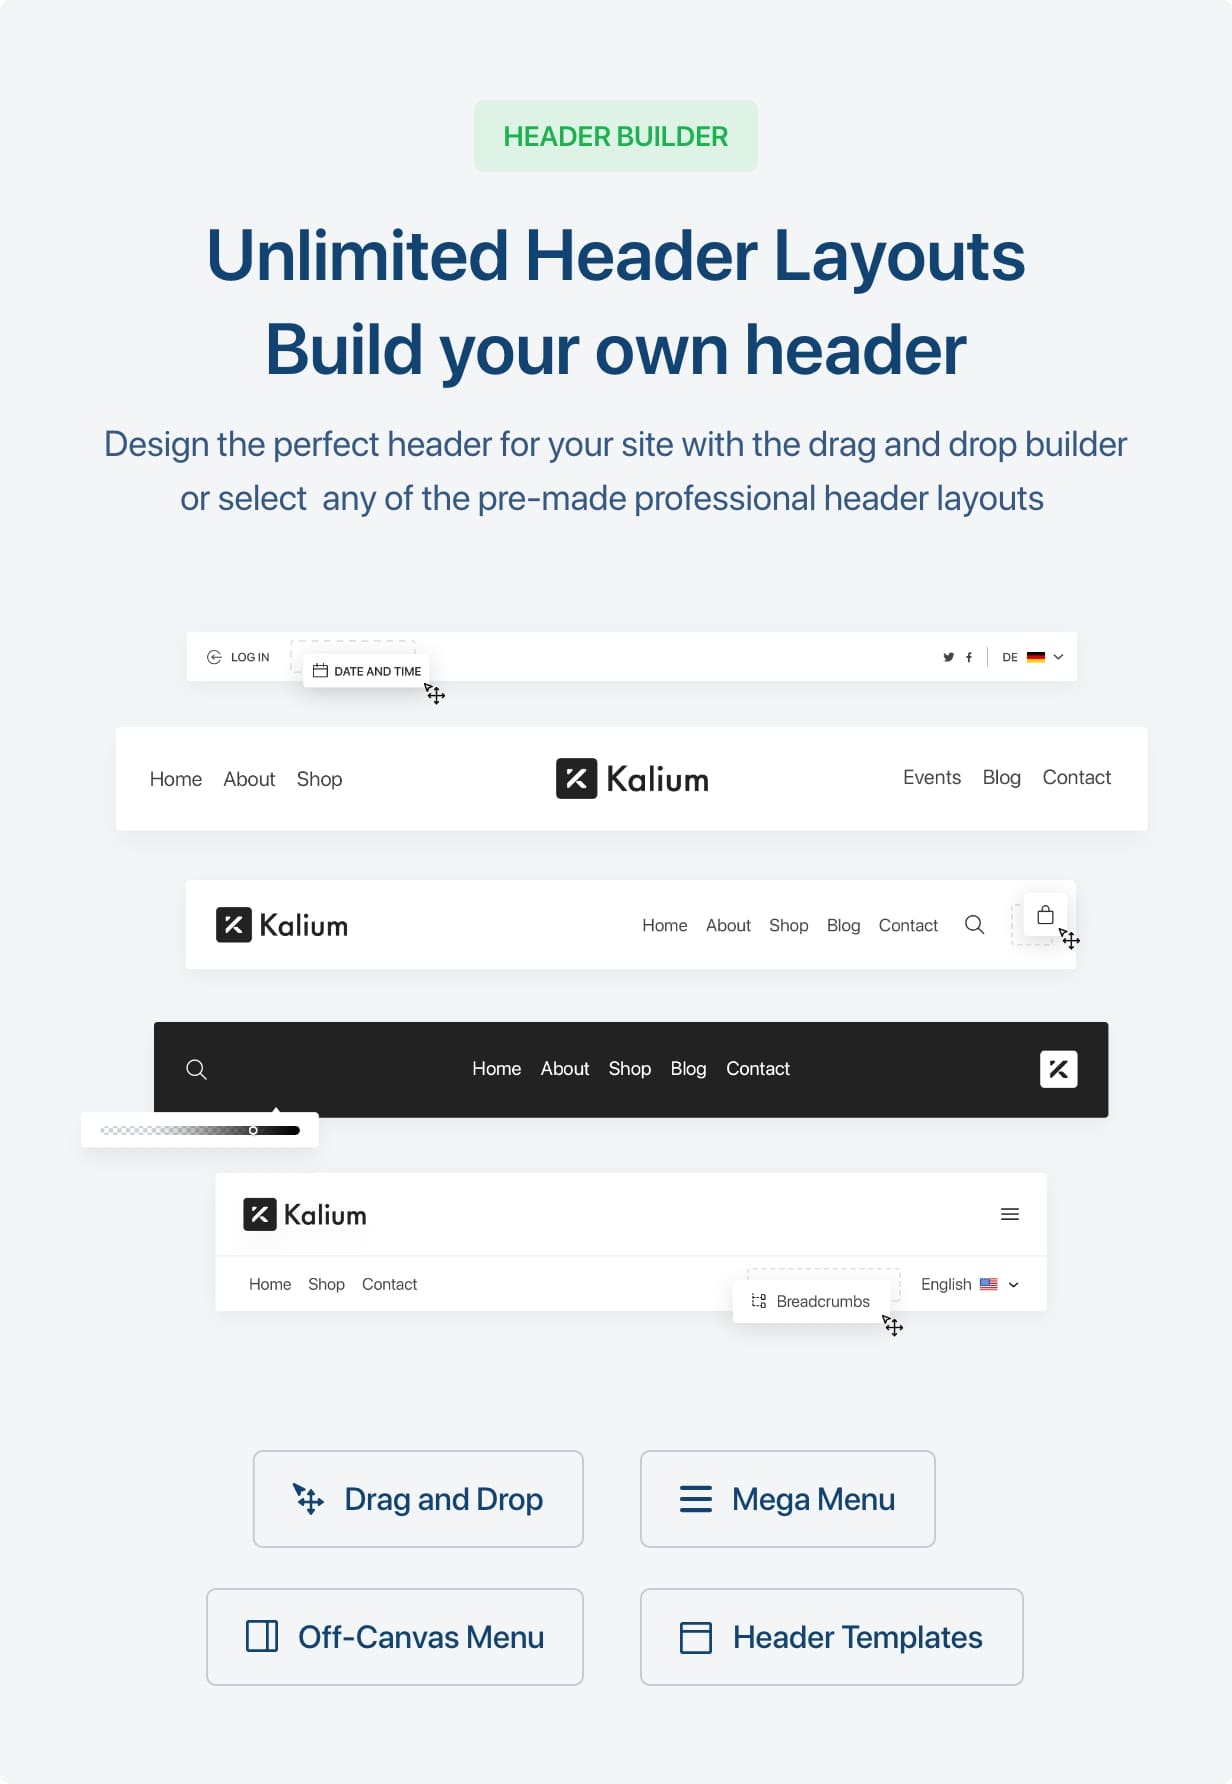 Unlimited Header Layous to build your own header